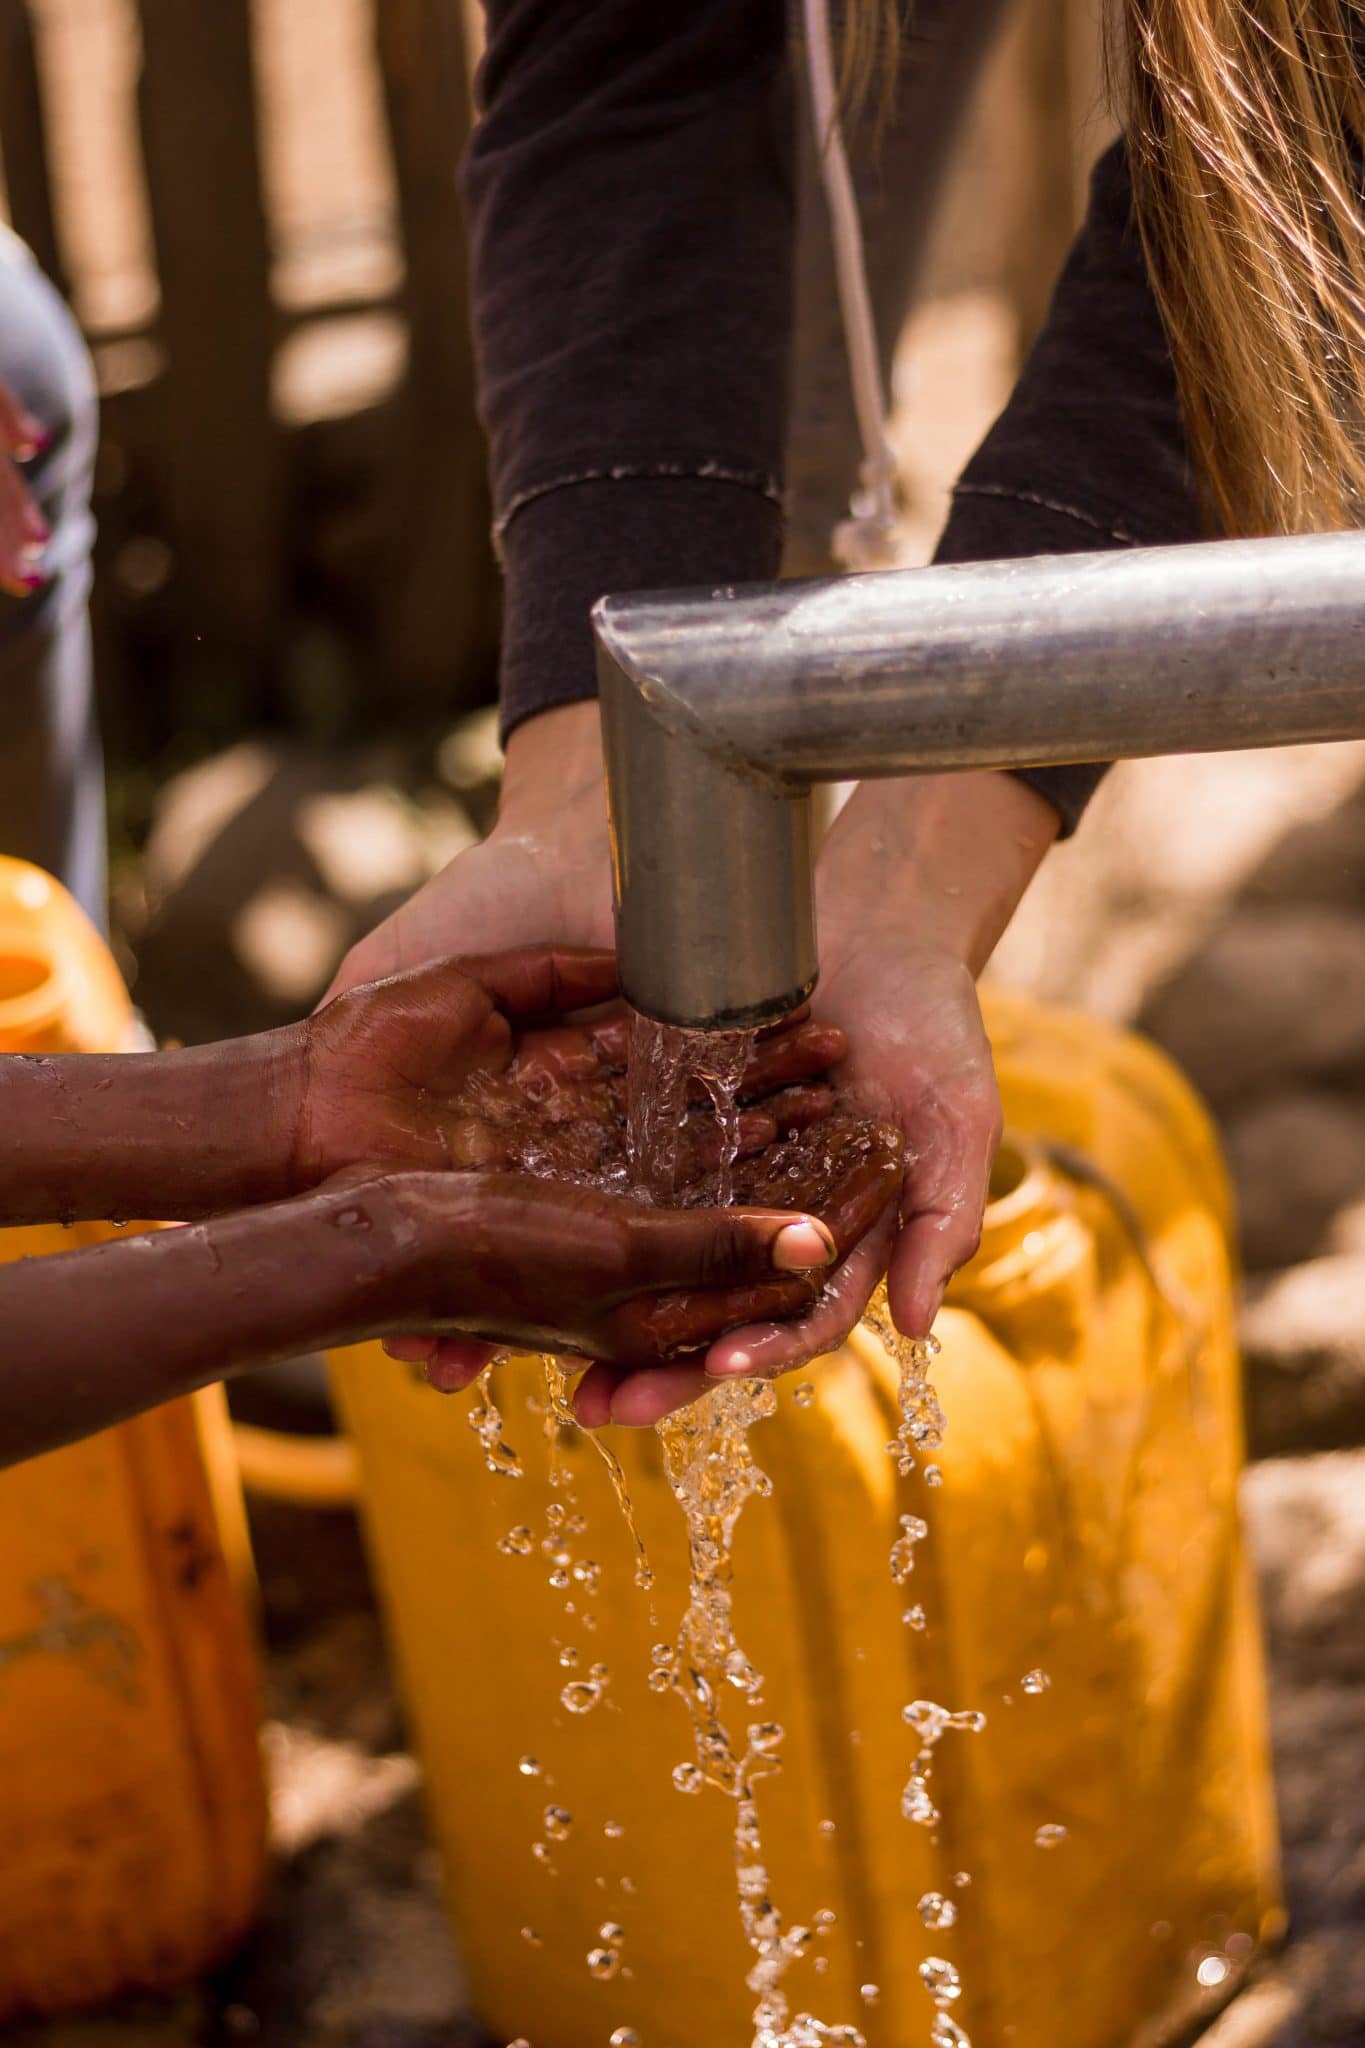 Earth Day 2021: Water, sanitation and hygiene, connecting the dots.